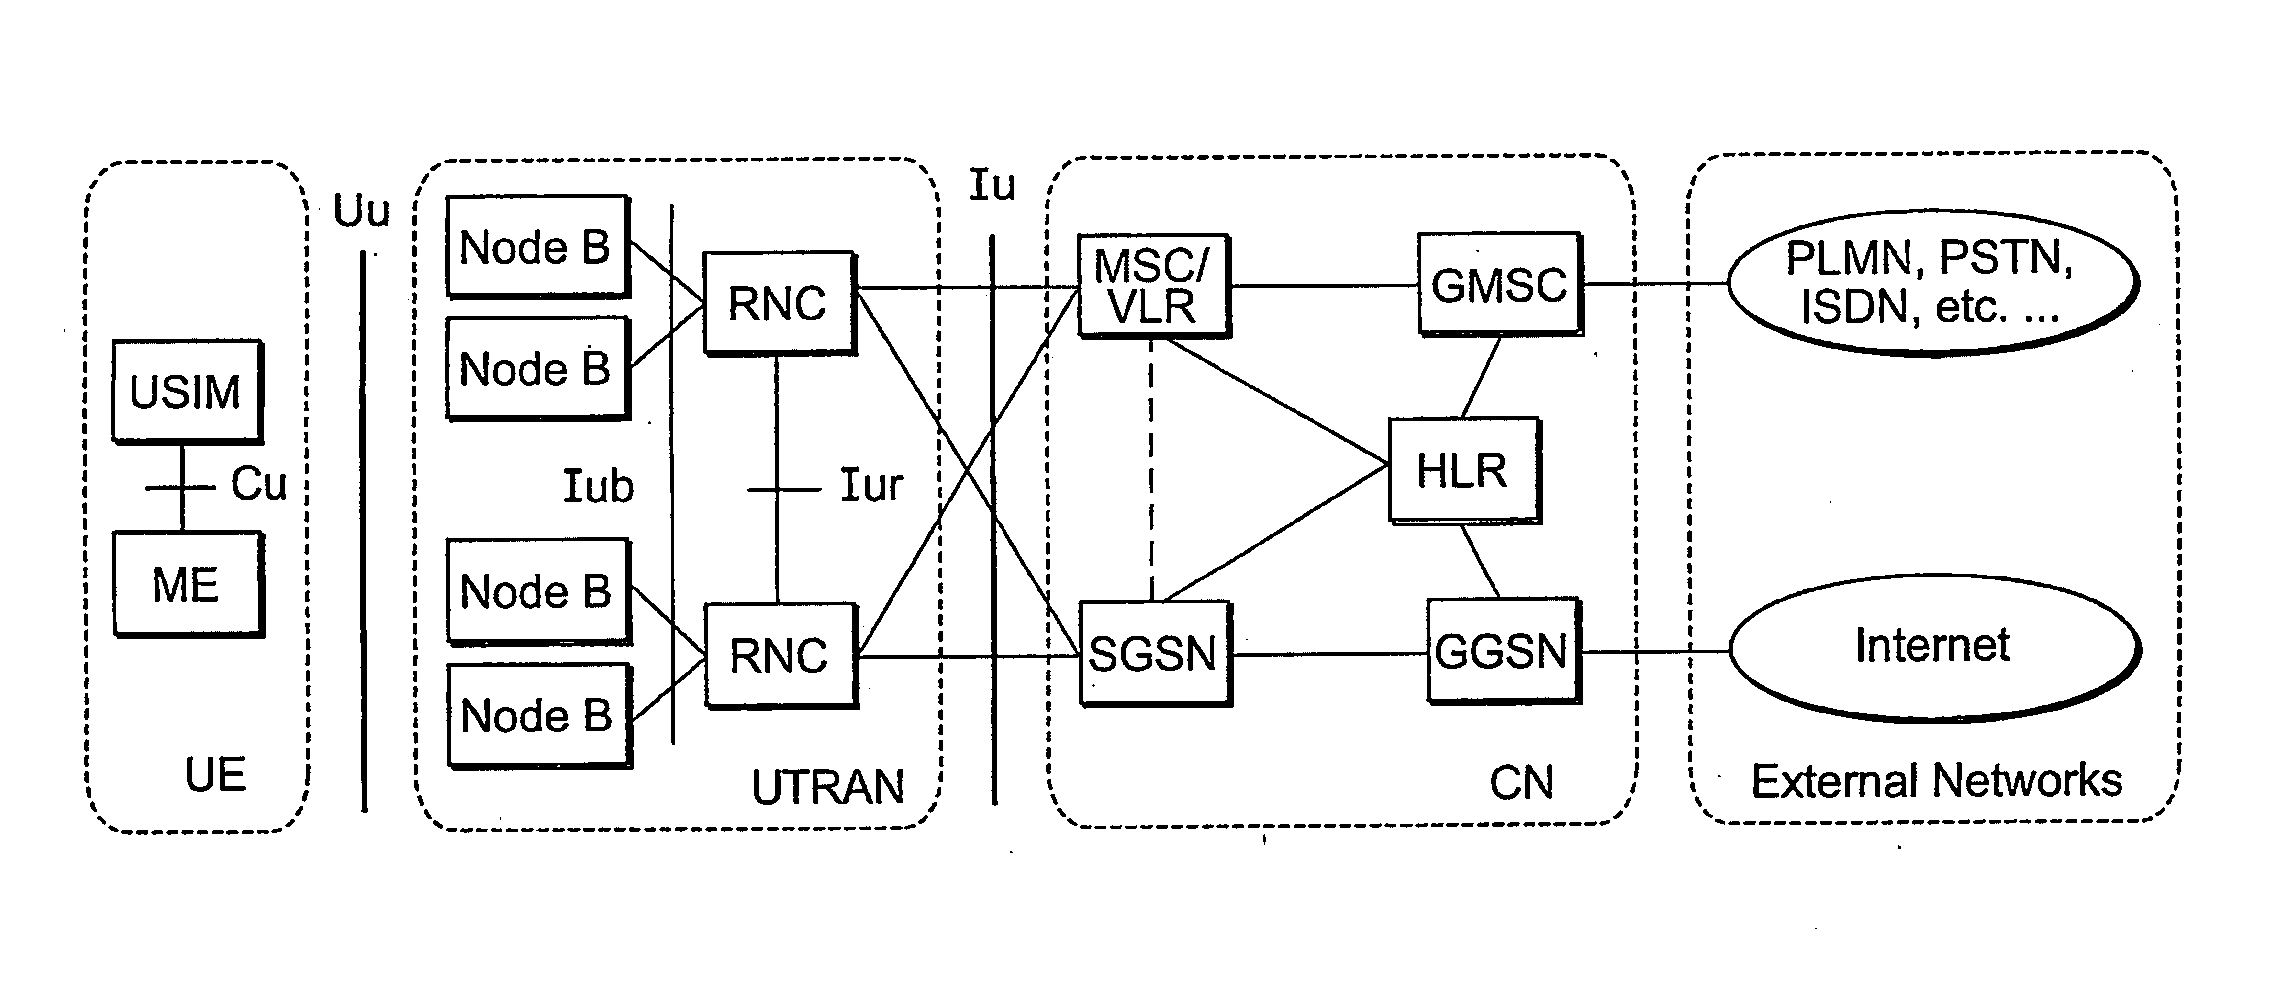 Interface, apparatus, and method for communication between a radio eqipment control node one or more remote radio equipment nodes